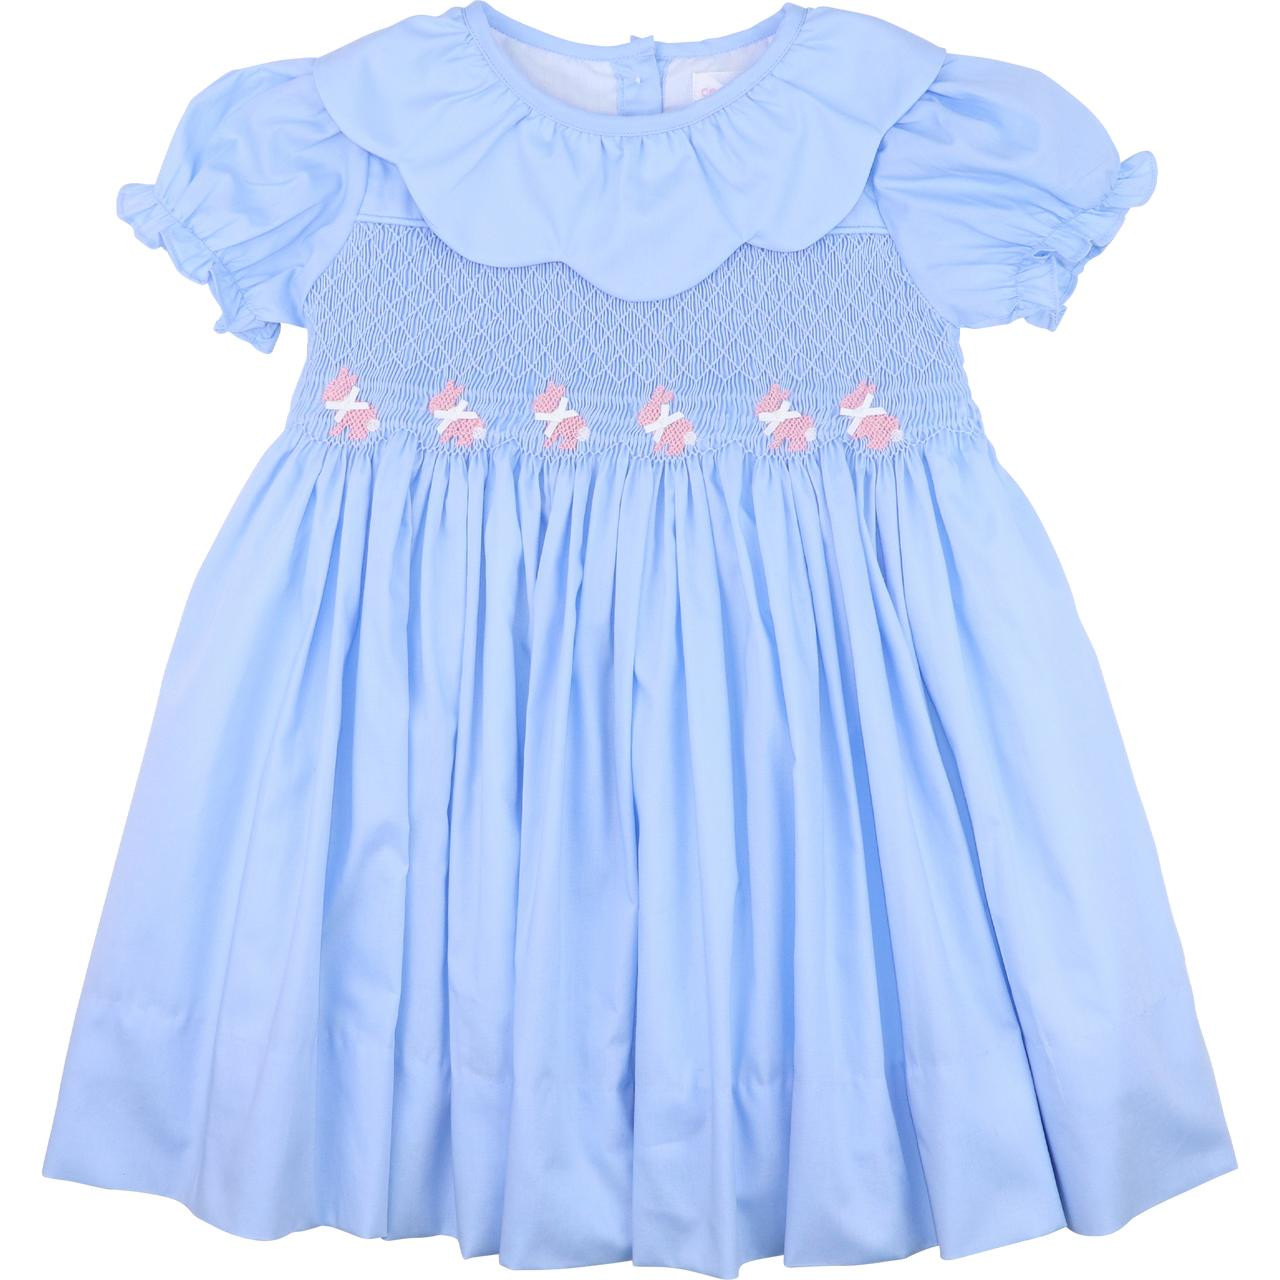 Blue Smocked Bunny Dress - Cecil and Lou